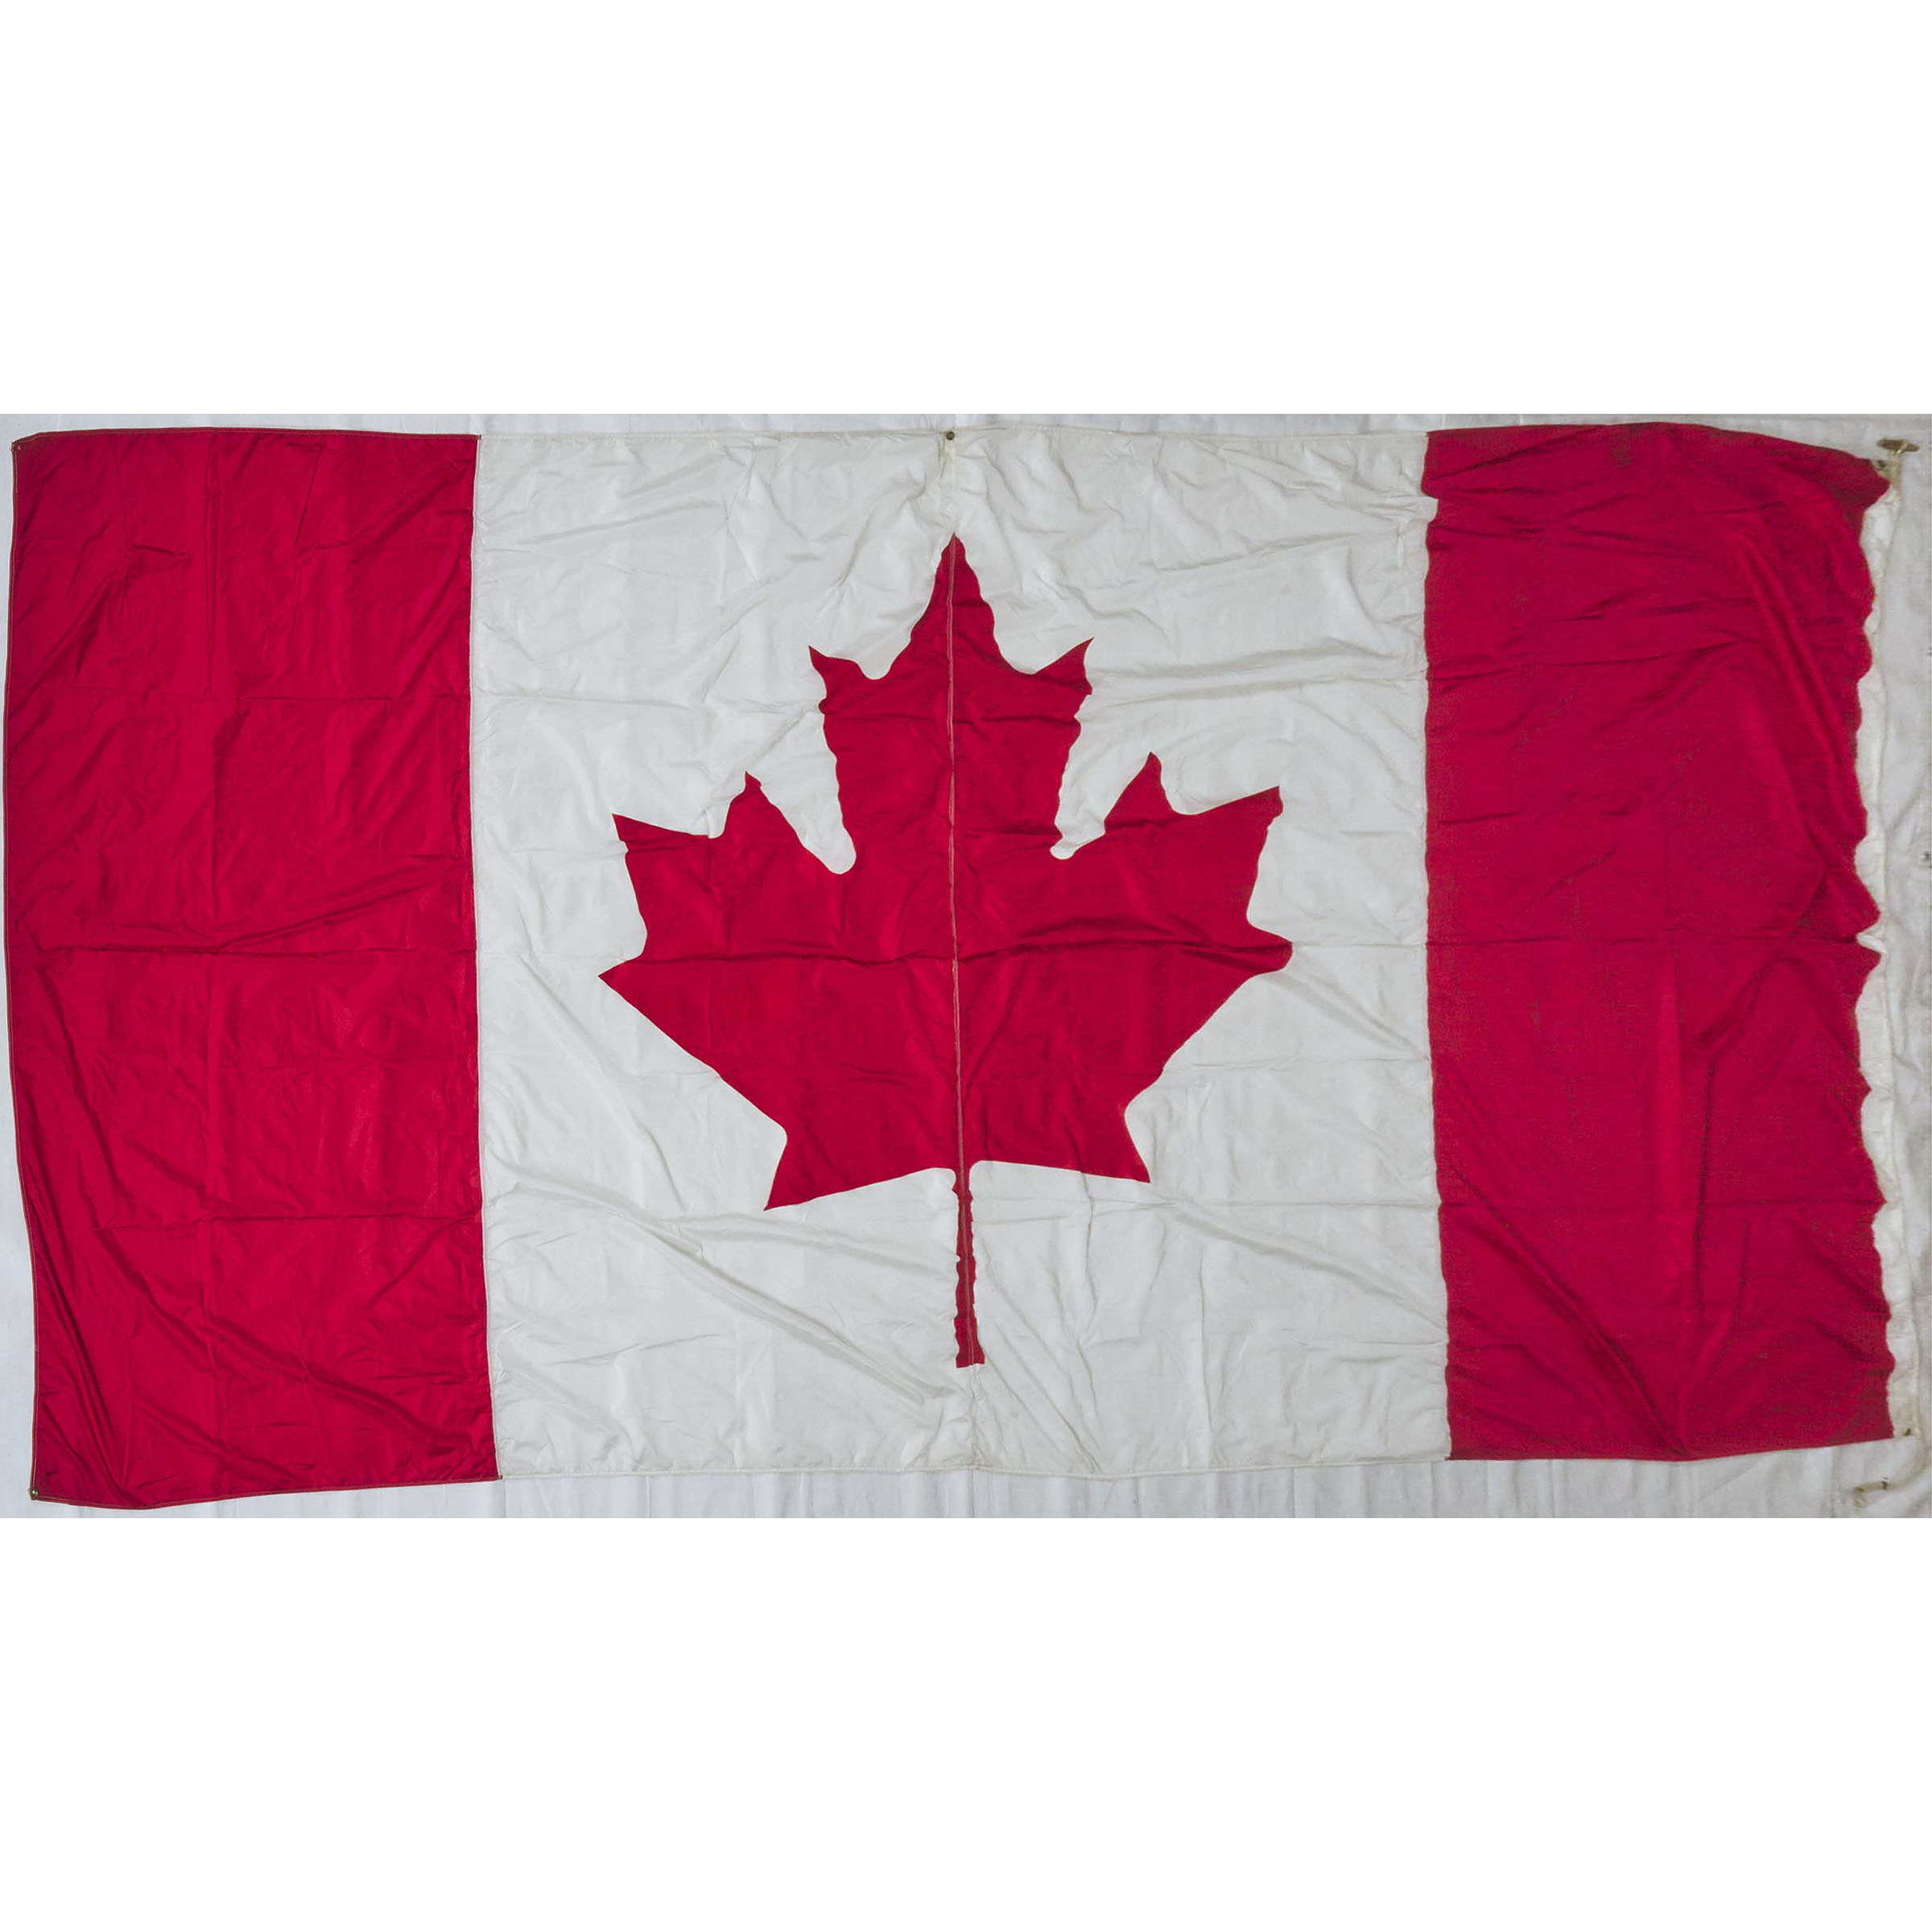 Large Canadian Flag, mid 20th century